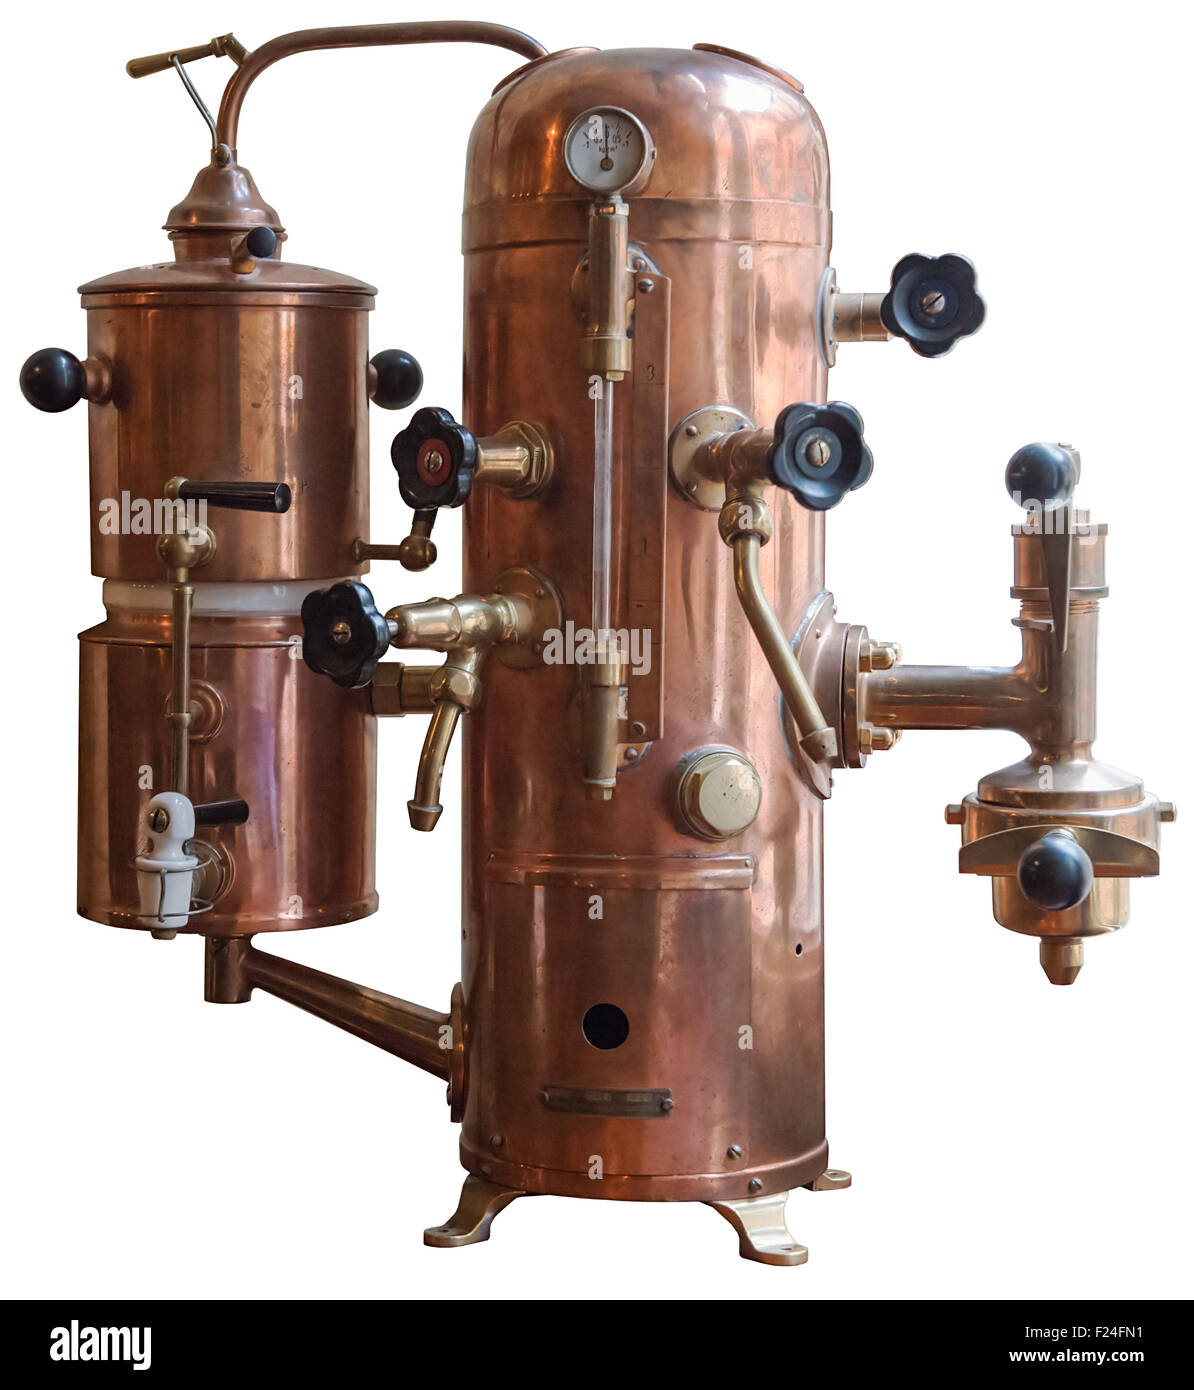 https://c8.alamy.com/comp/F24FN1/ancient-copper-coffee-machine-as-isolated-object-F24FN1.jpg